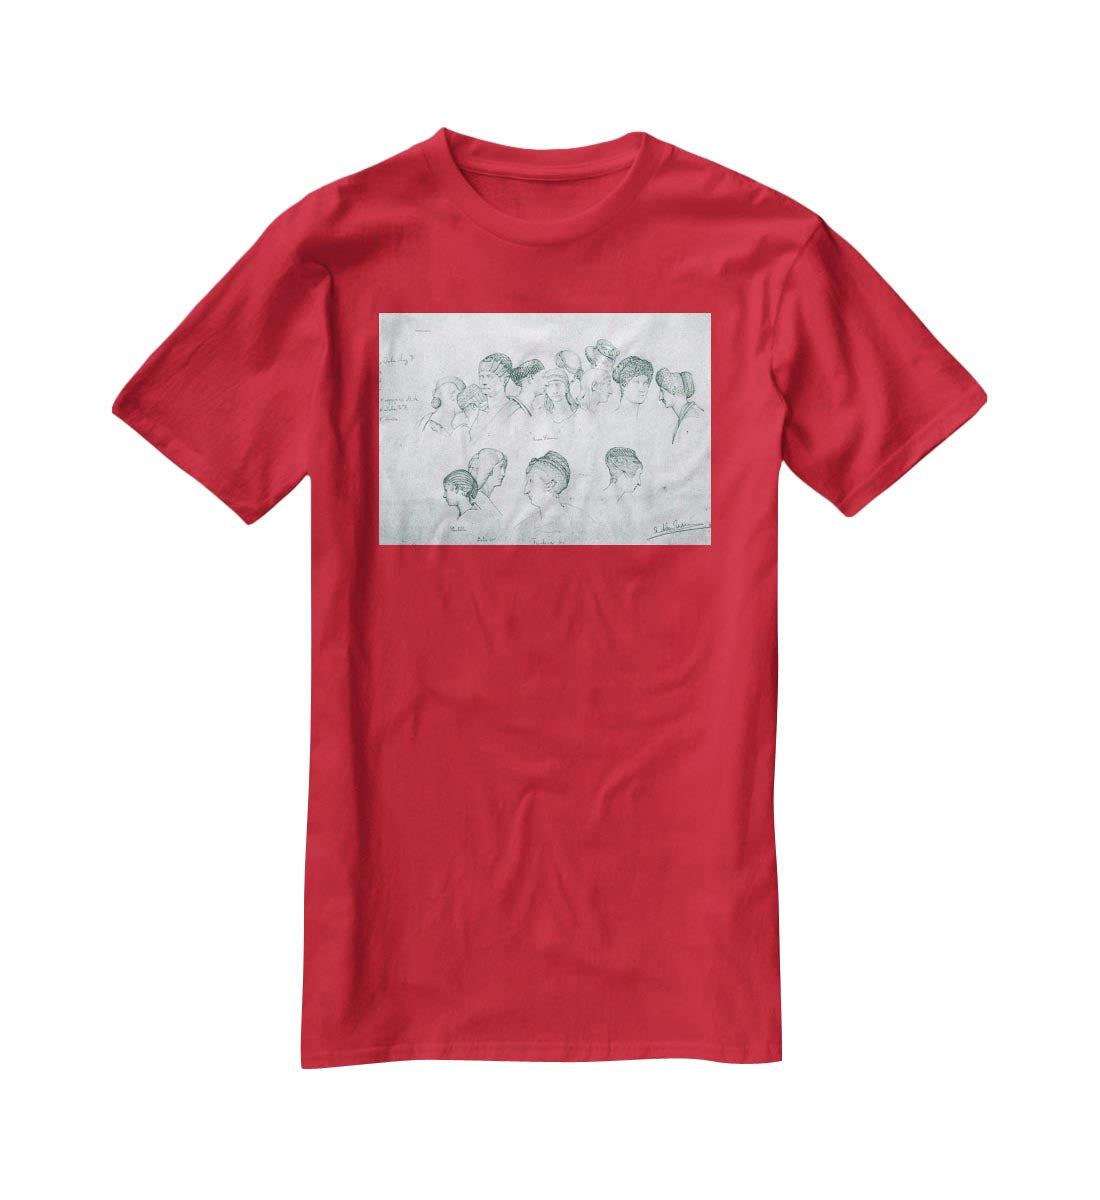 Sketch of hairstyles from ancient sculptures by Alma Tadema T-Shirt - Canvas Art Rocks - 4